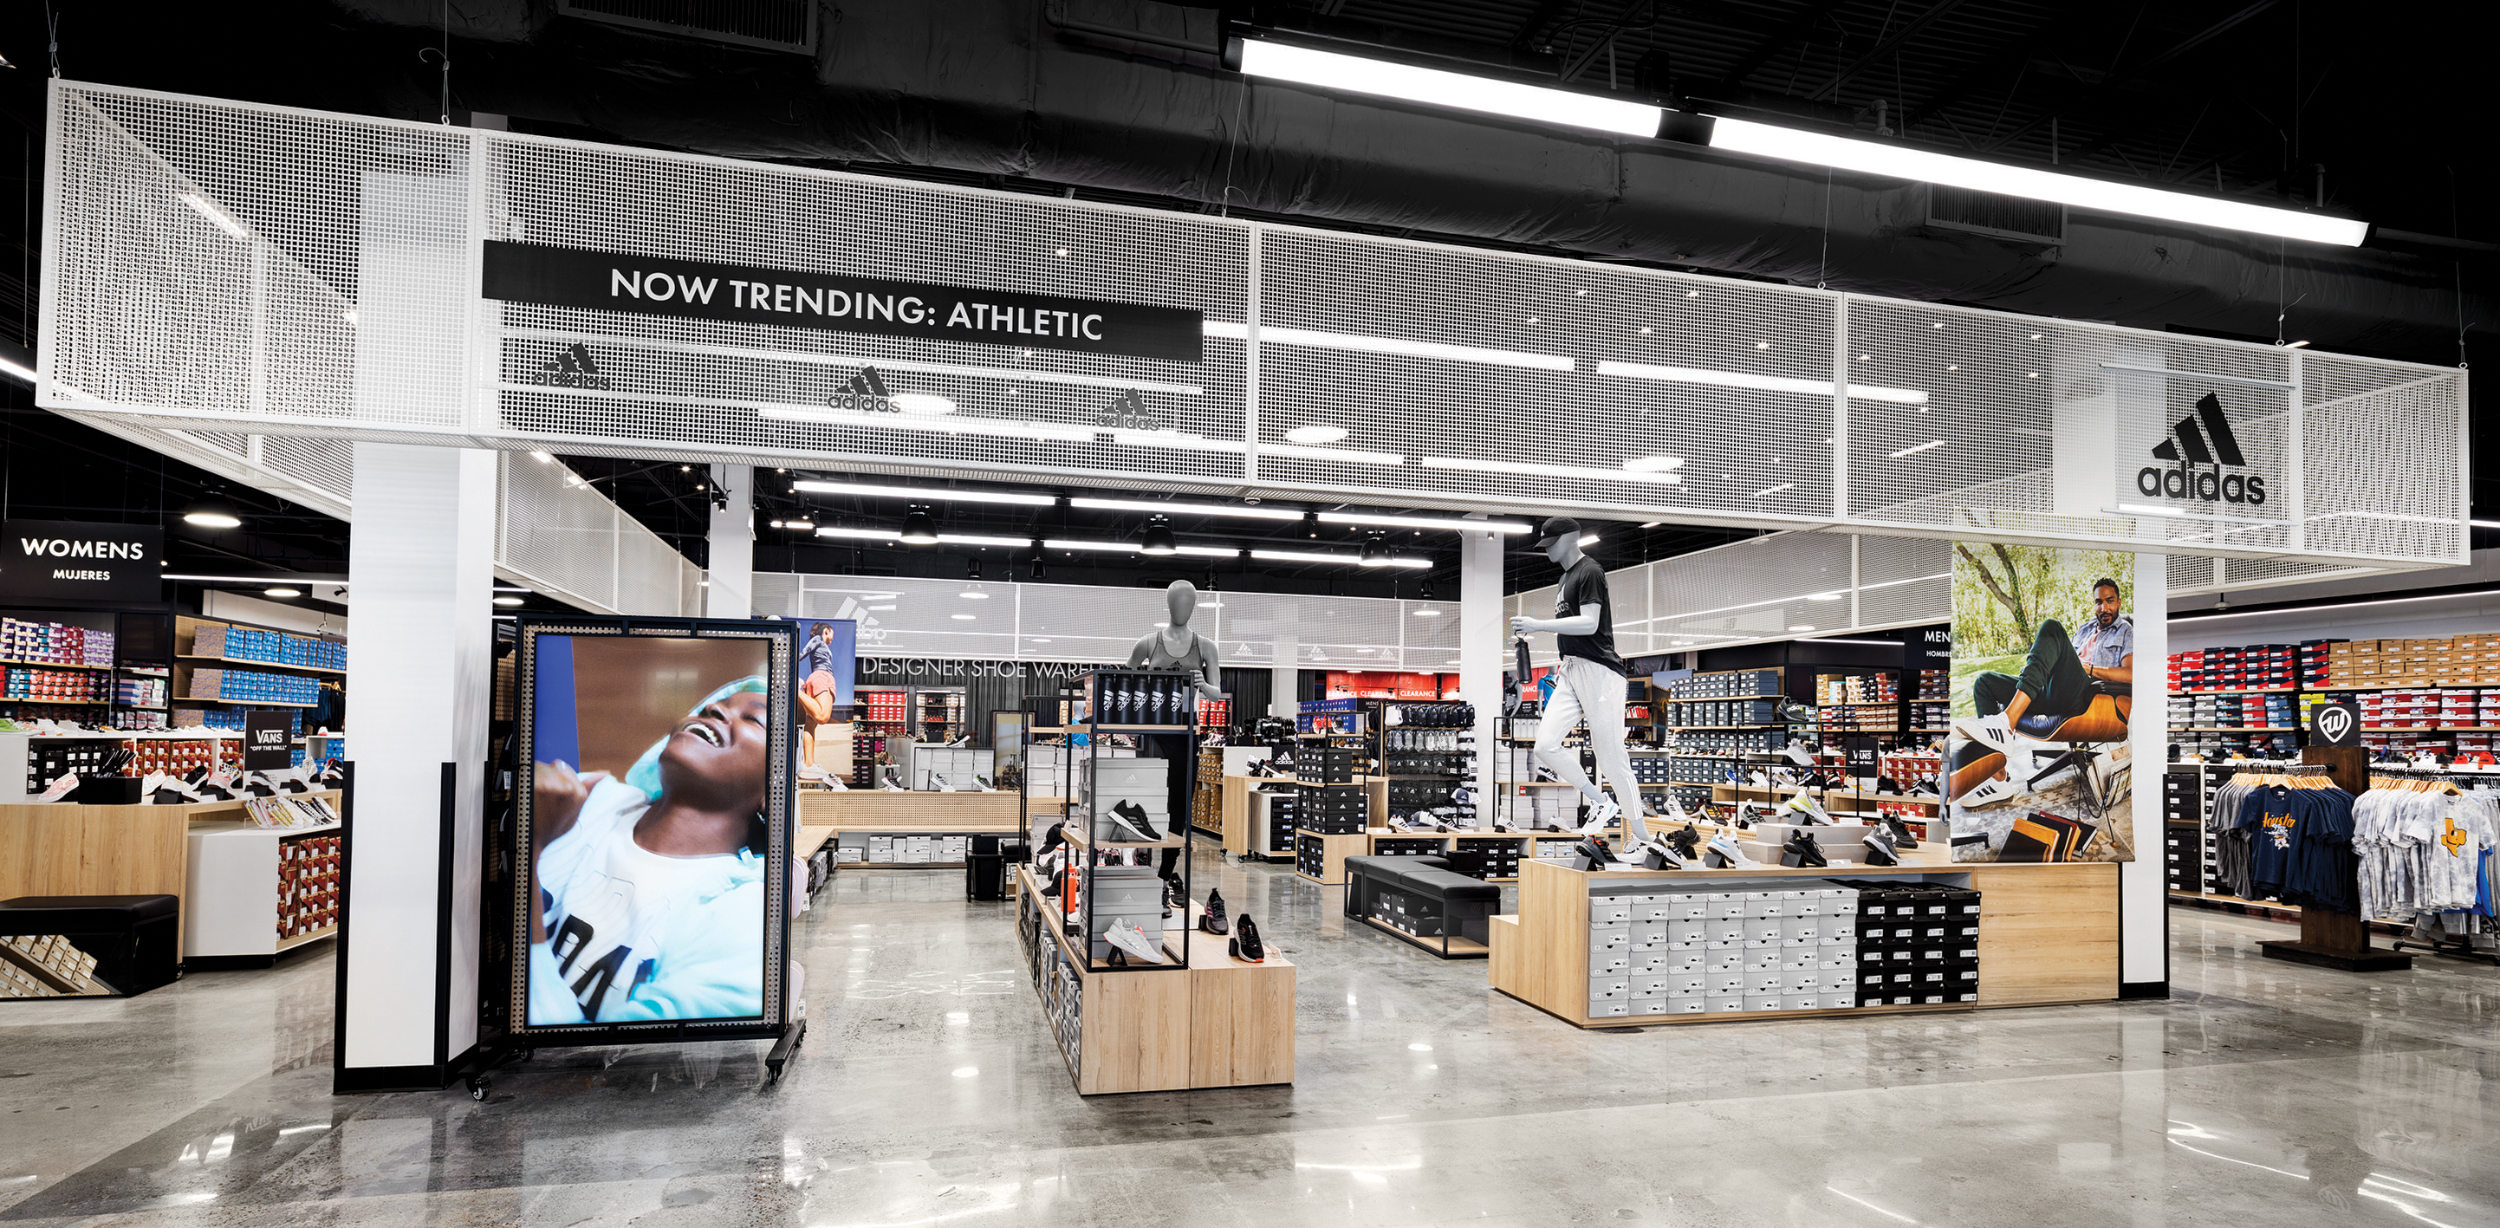 Footwear Stores Are Embracing New Trends to Capture Customers